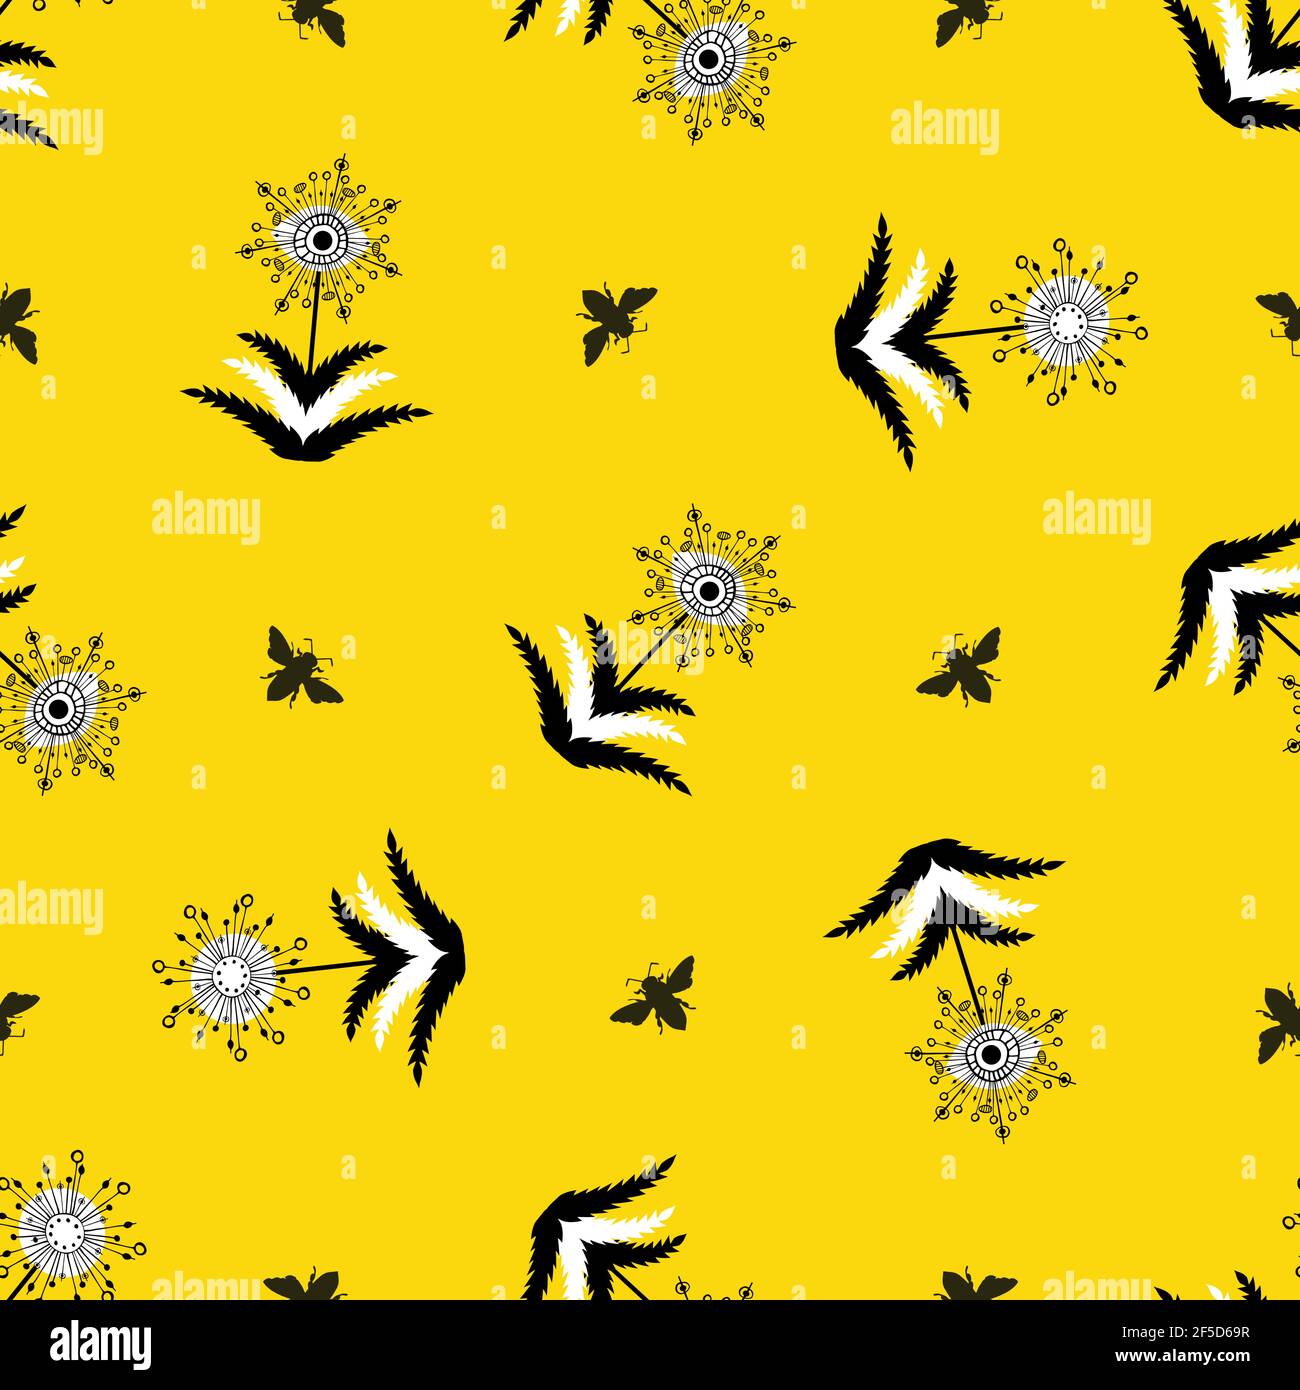 Abstract dandelion seed and honey bees seamless vector pattern background.Stylized folk art herbacious flowers and insects yellow white black backdrop Stock Vector